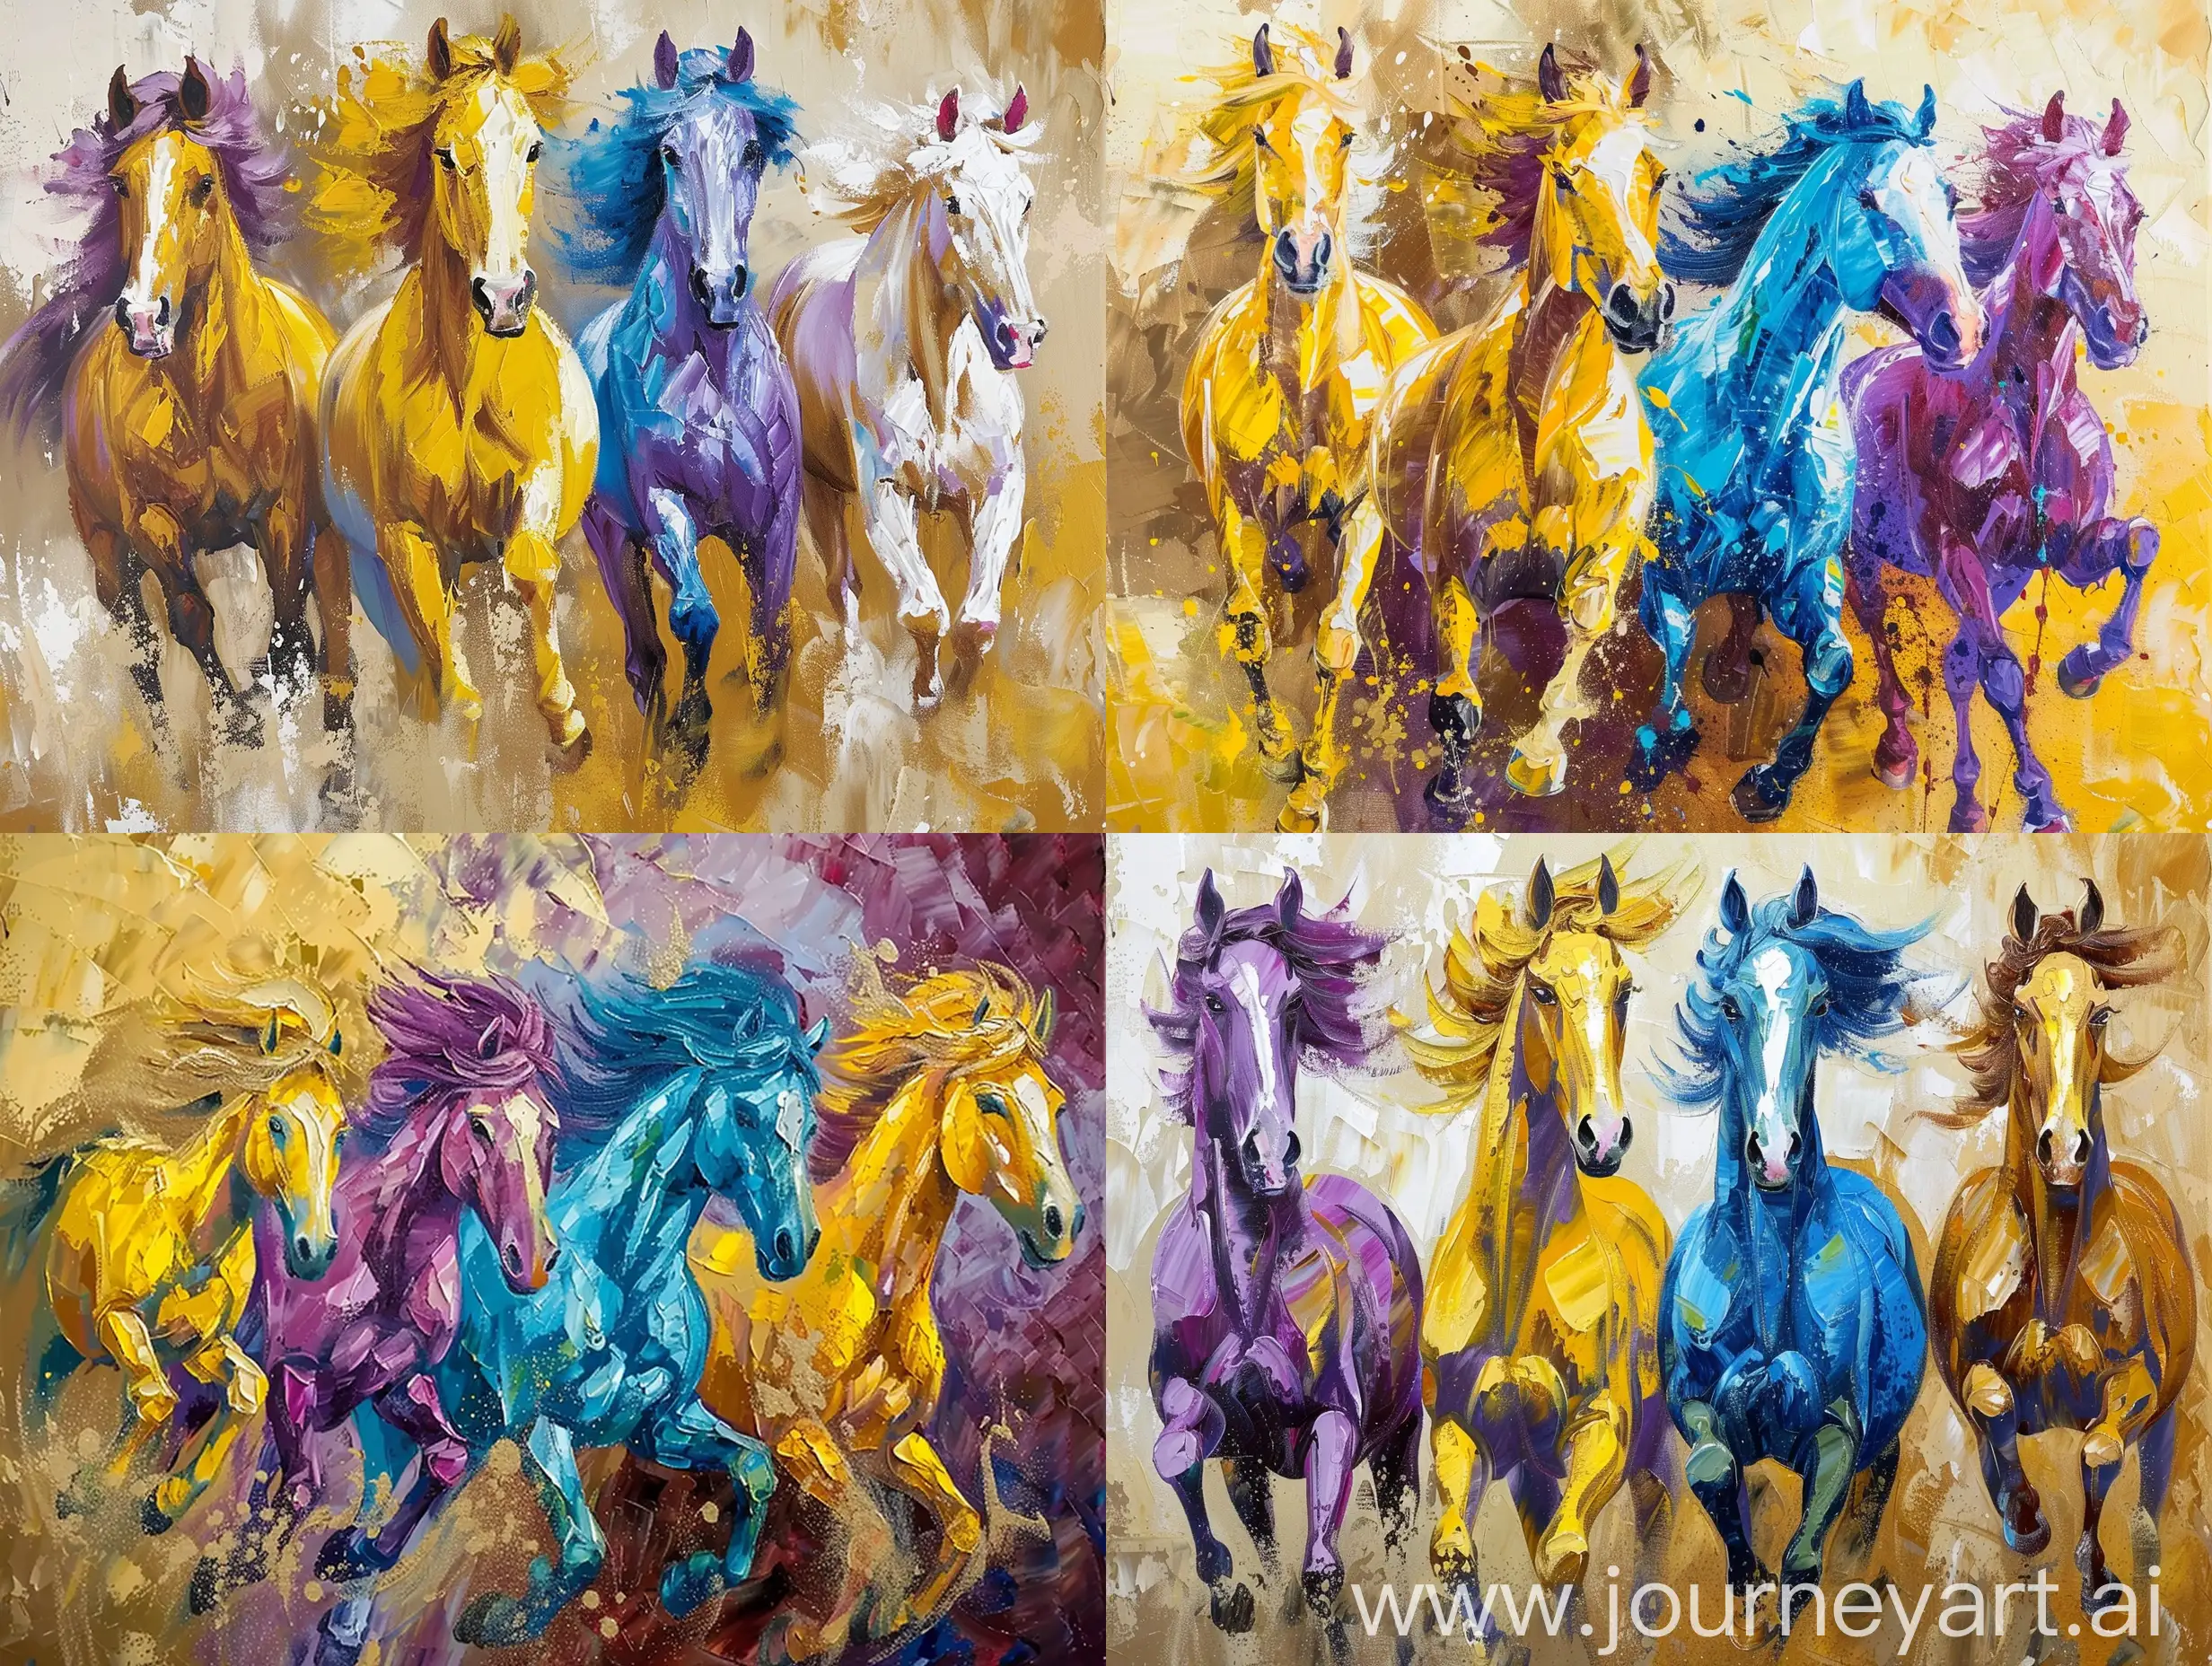 Painting and oil painting of horses with different and beautiful colors for decoration with yellow, purple, blue, gold and brown colors.